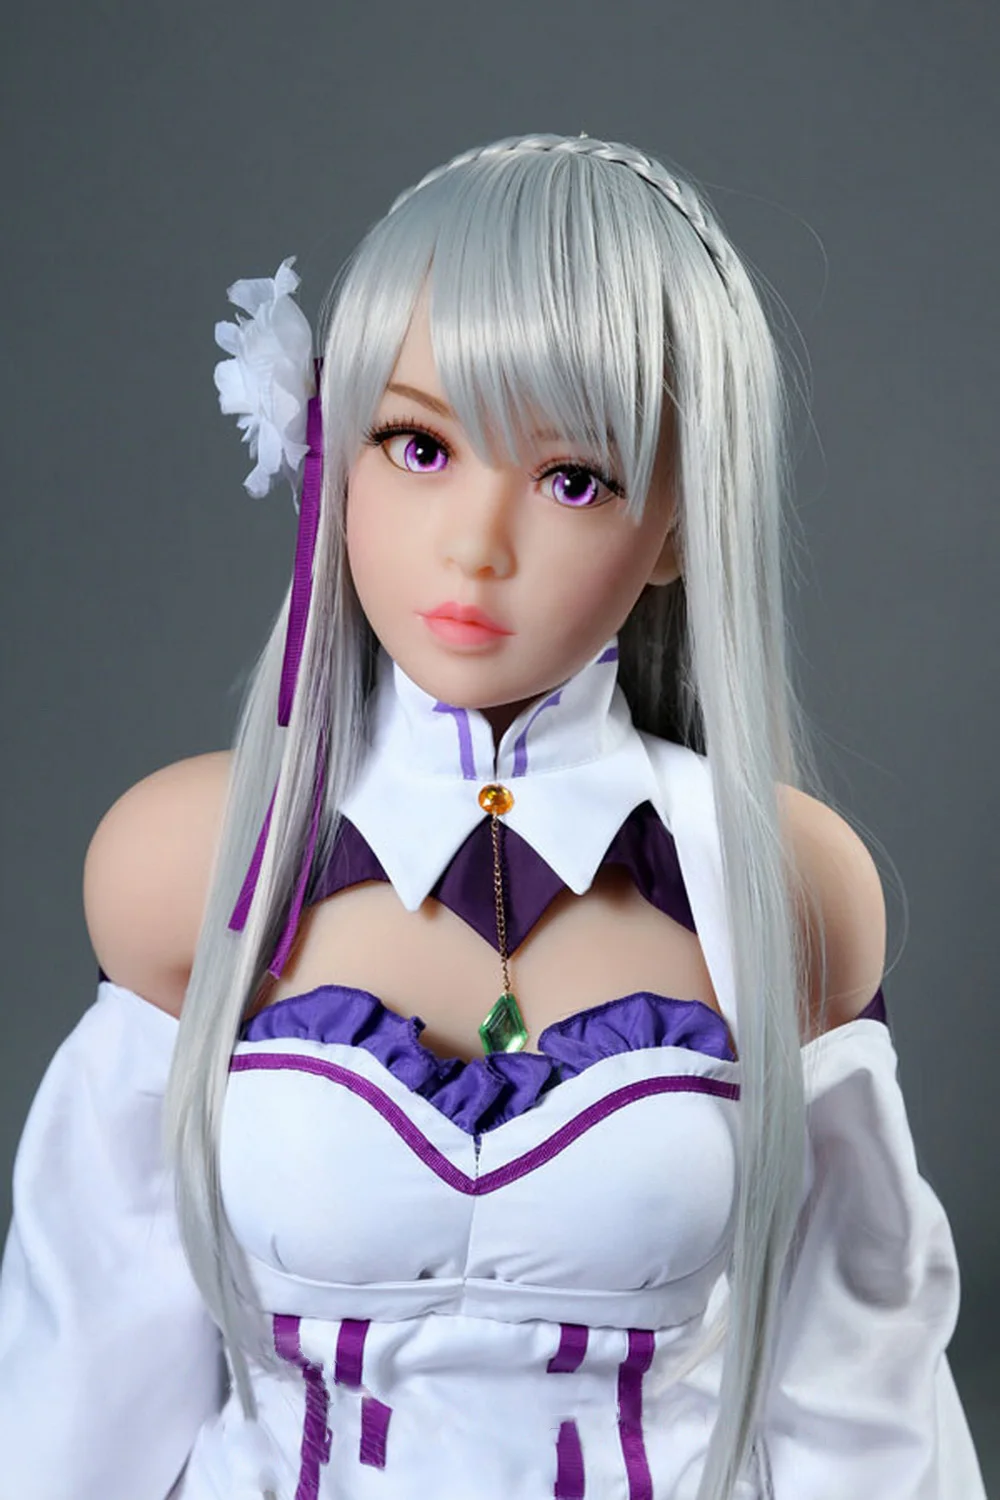 Anime sex doll in purple clothes